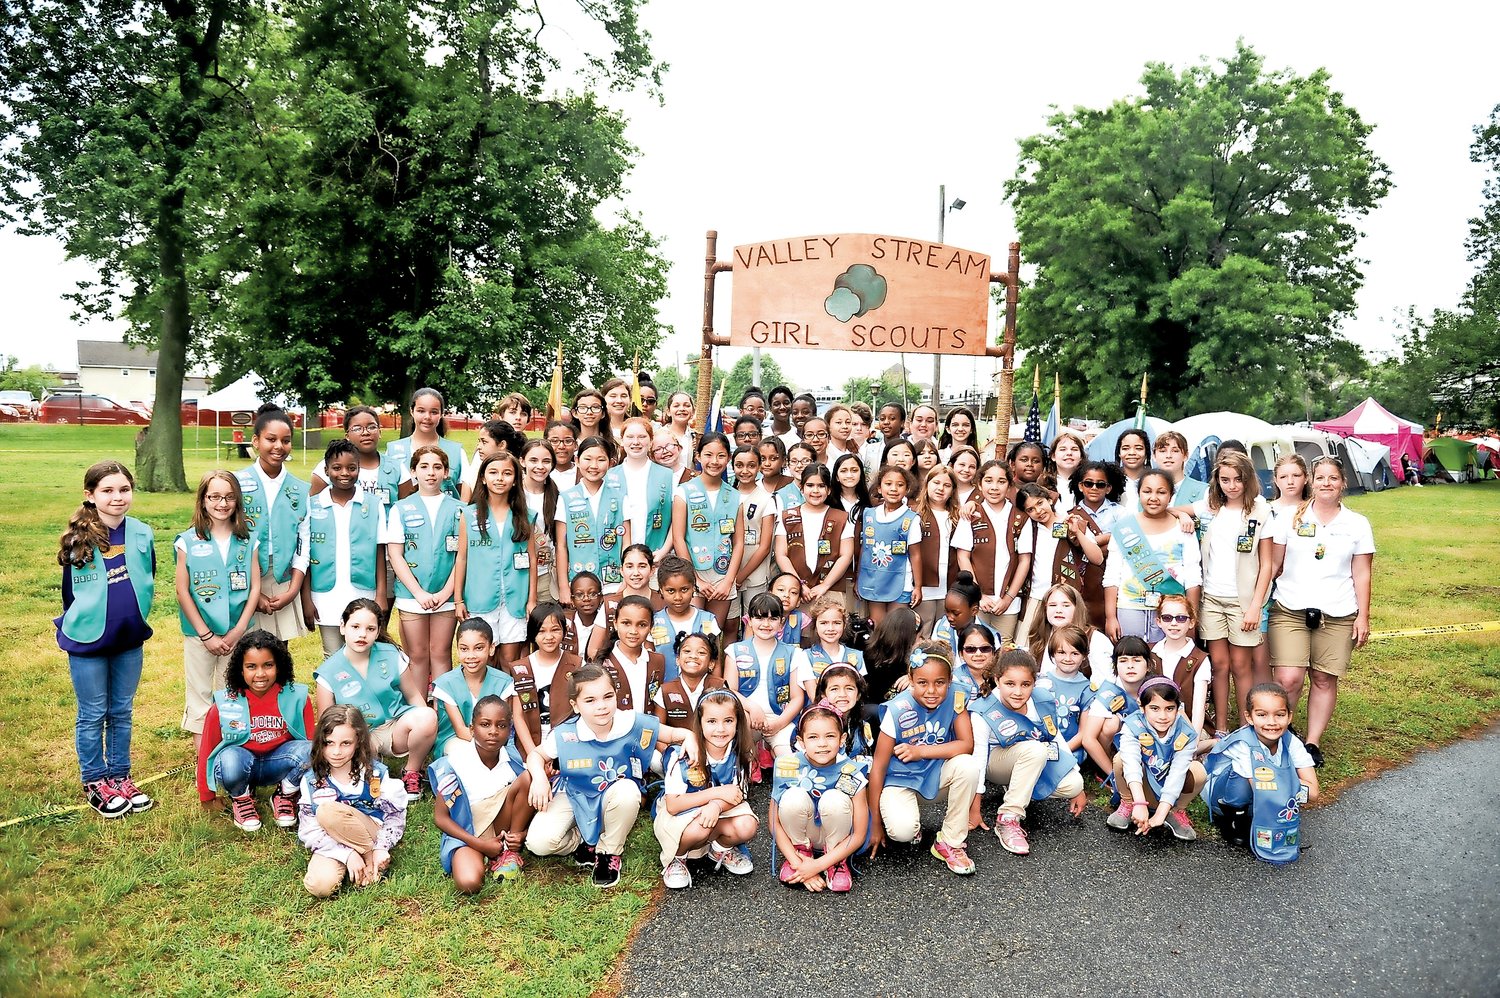 GSNC bars Girl Scouts from participating in V.S. Camporee Herald Community Newspapers www